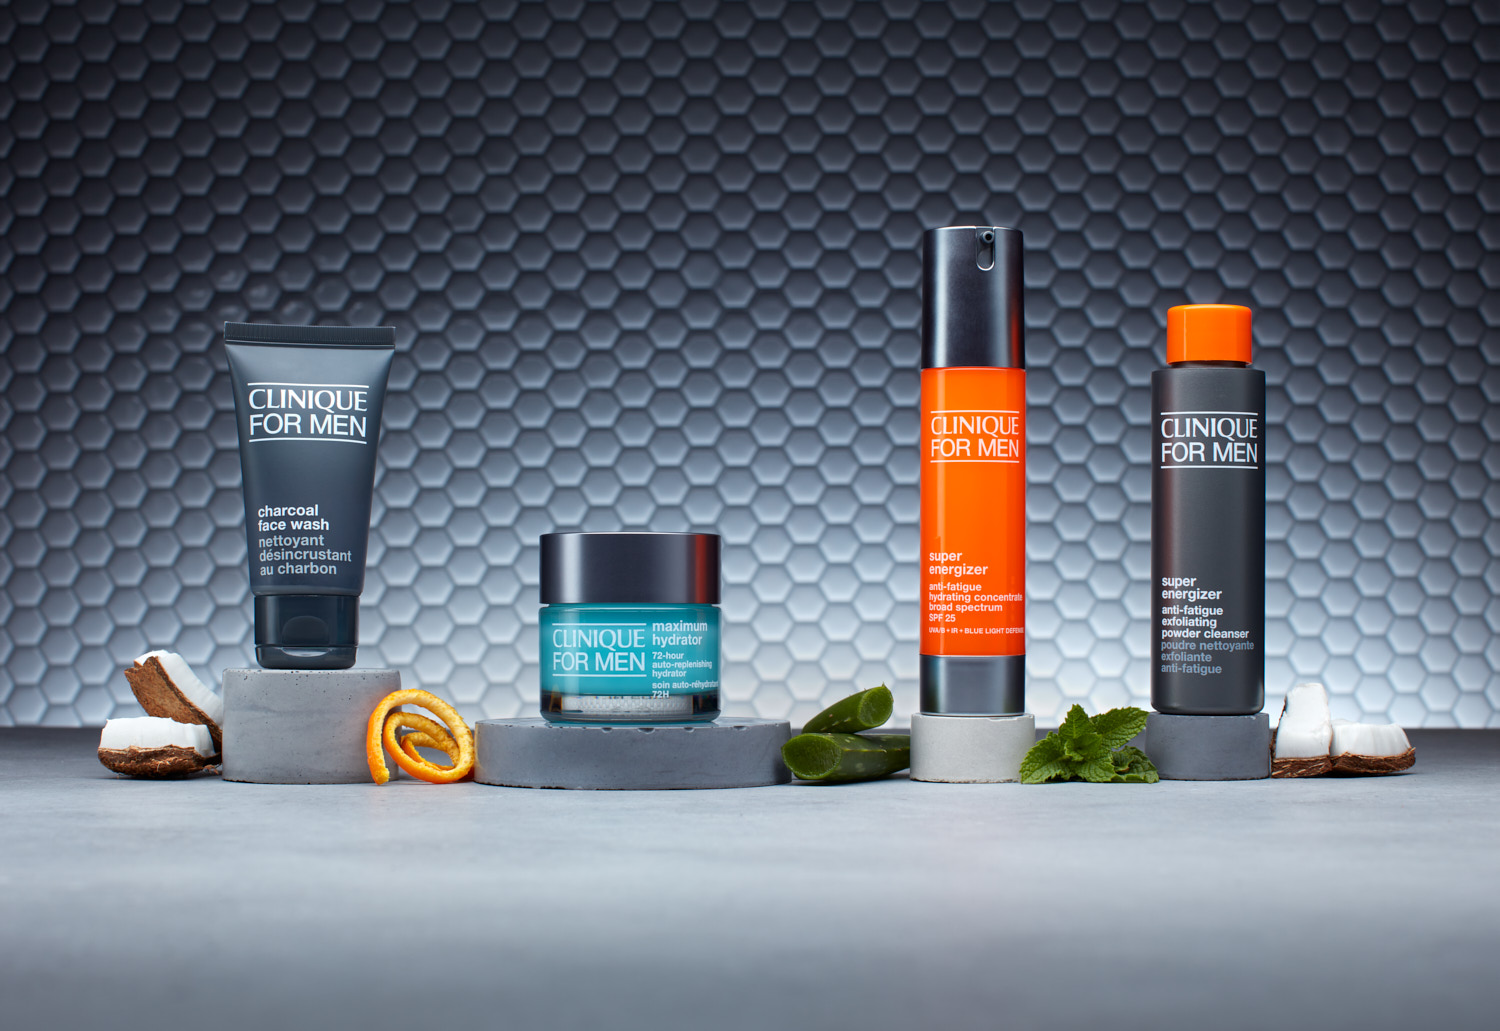 Clinique mens still life cosmetics product photo with ingredients.